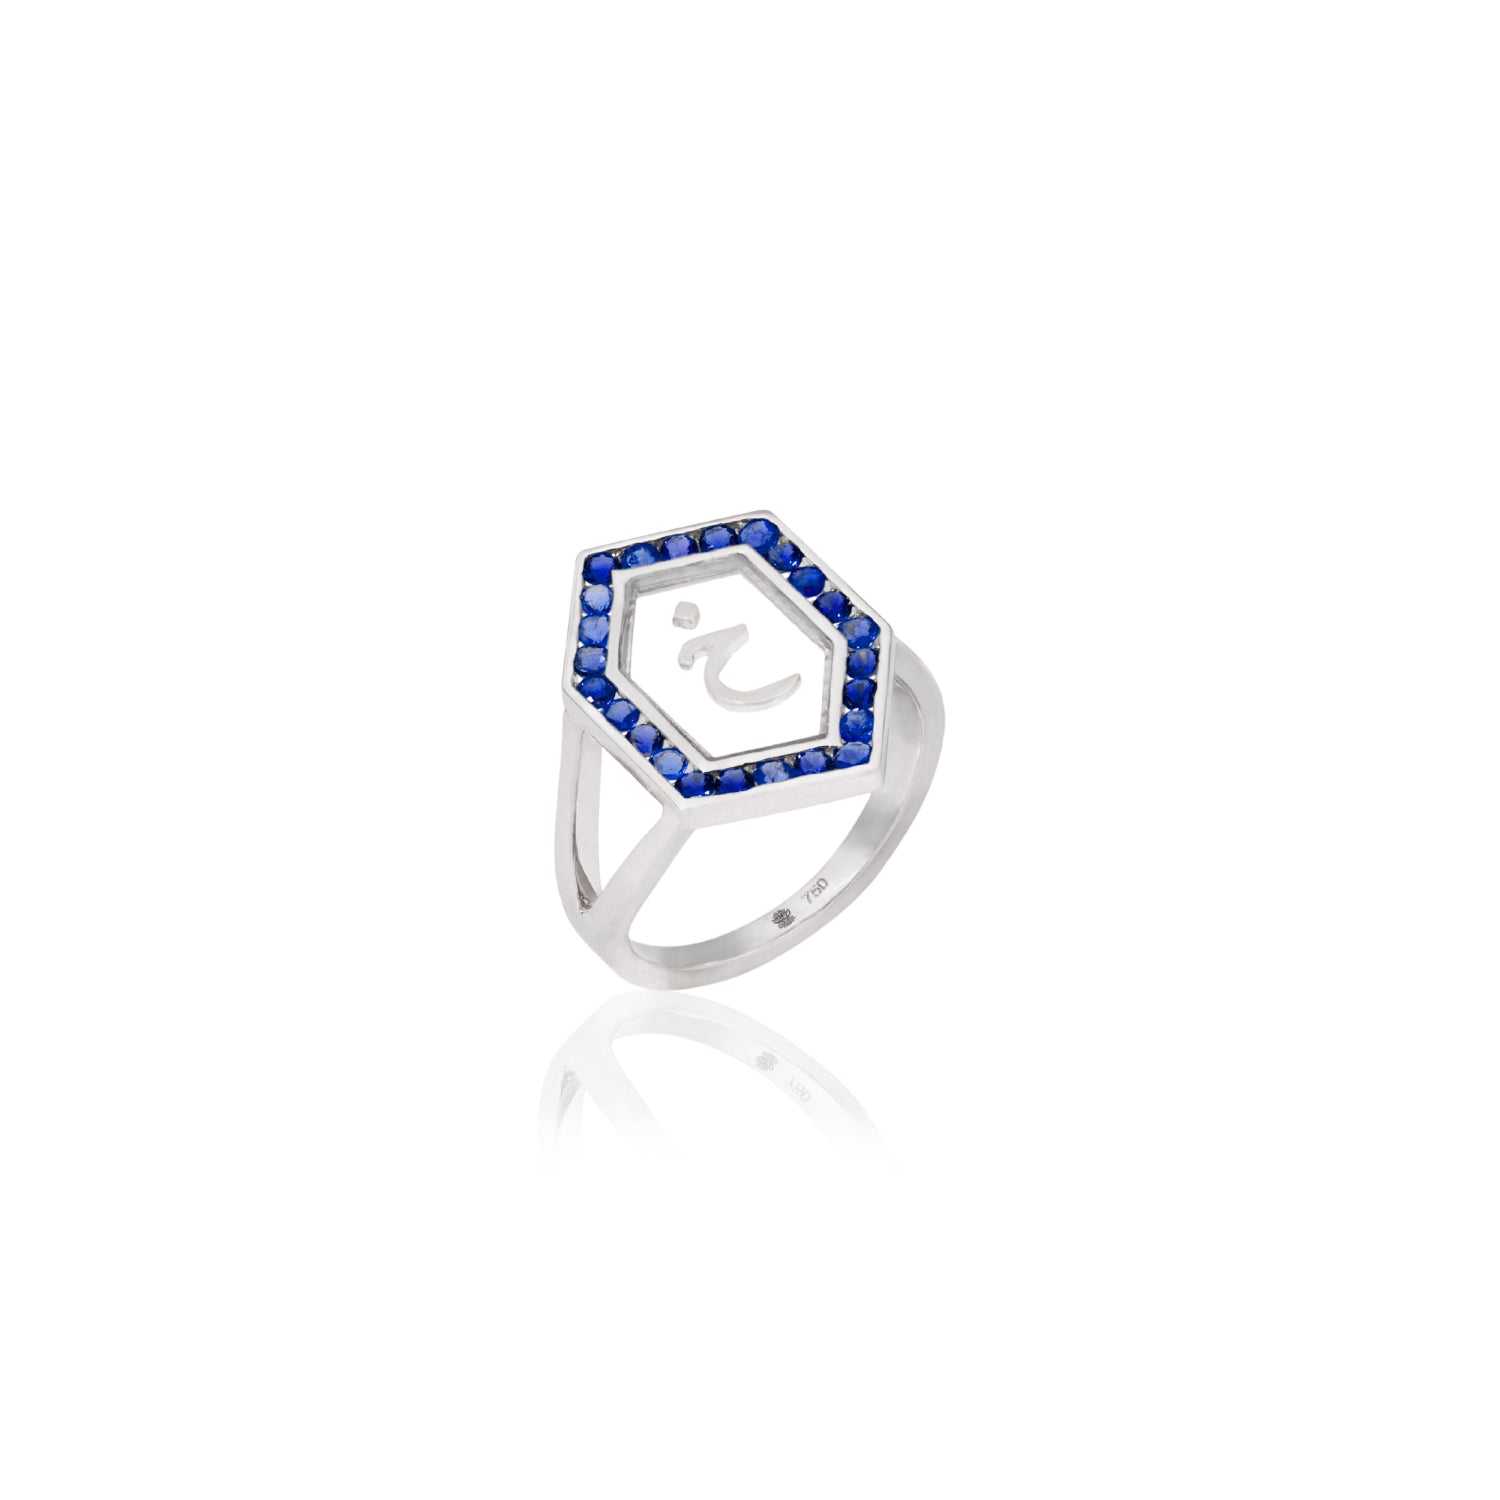 Qamoos 1.0 Letter خ Sapphire Ring in White Gold